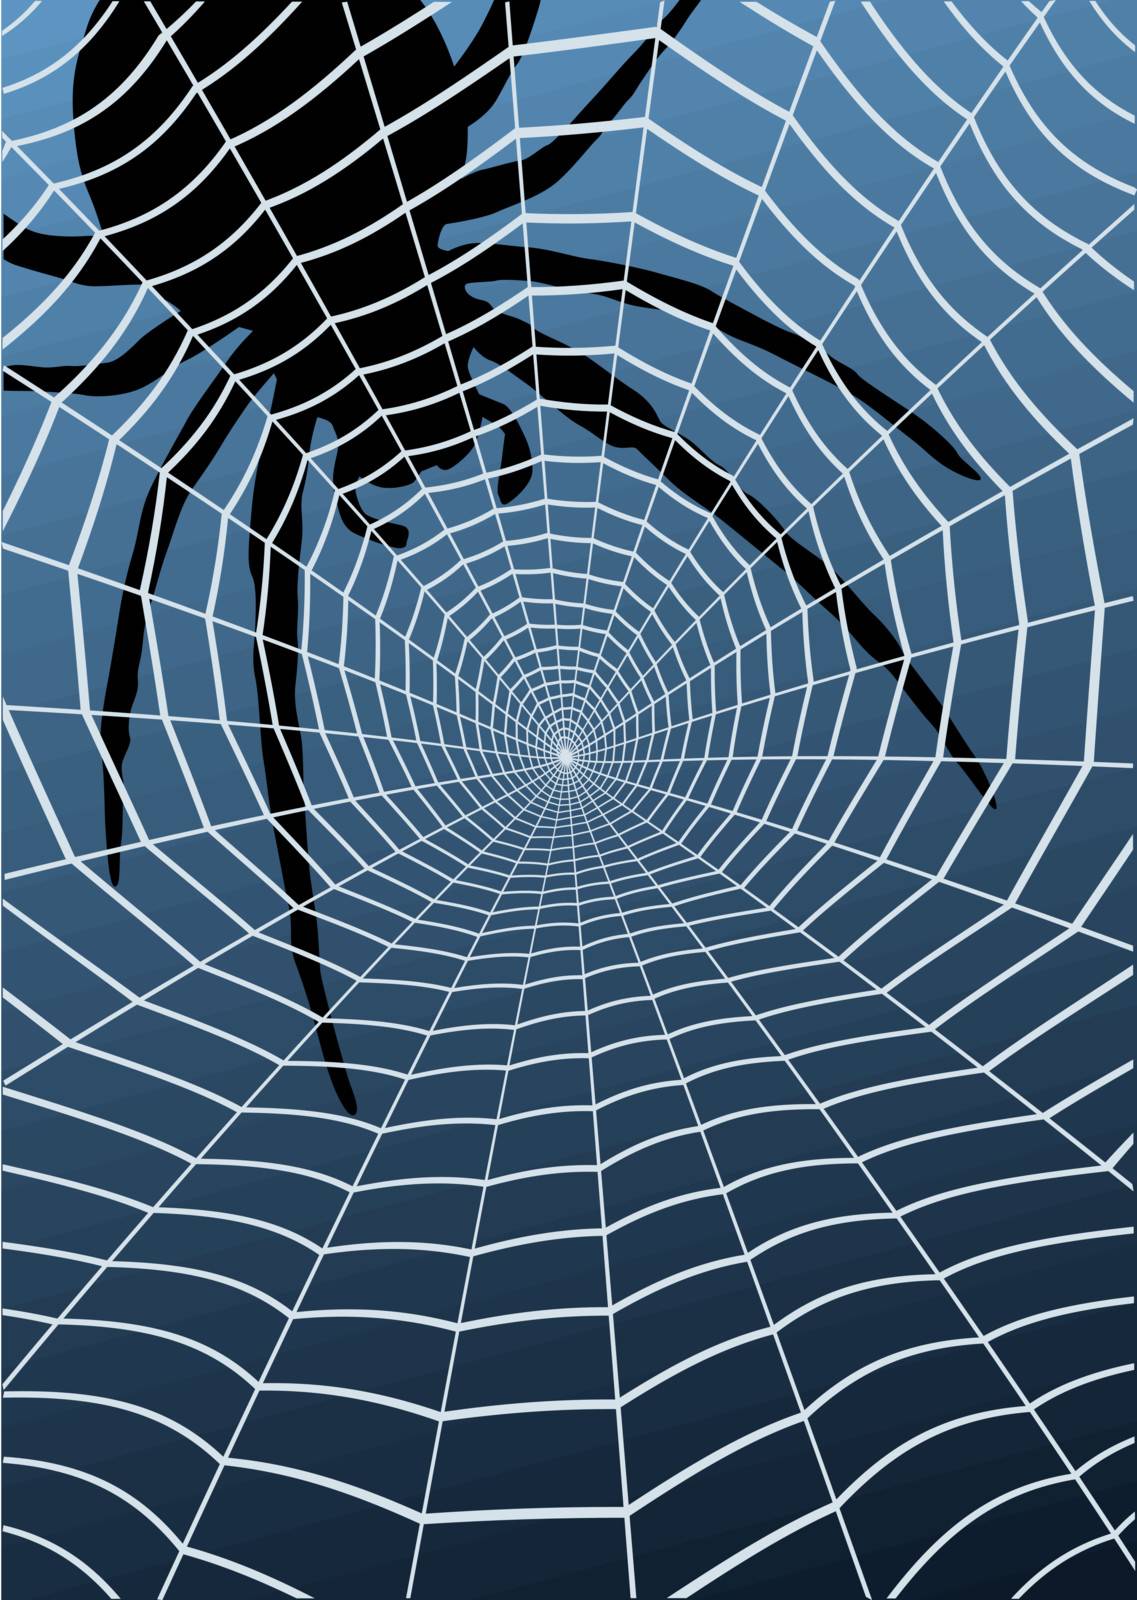 Editable vector illustration of a spider and web